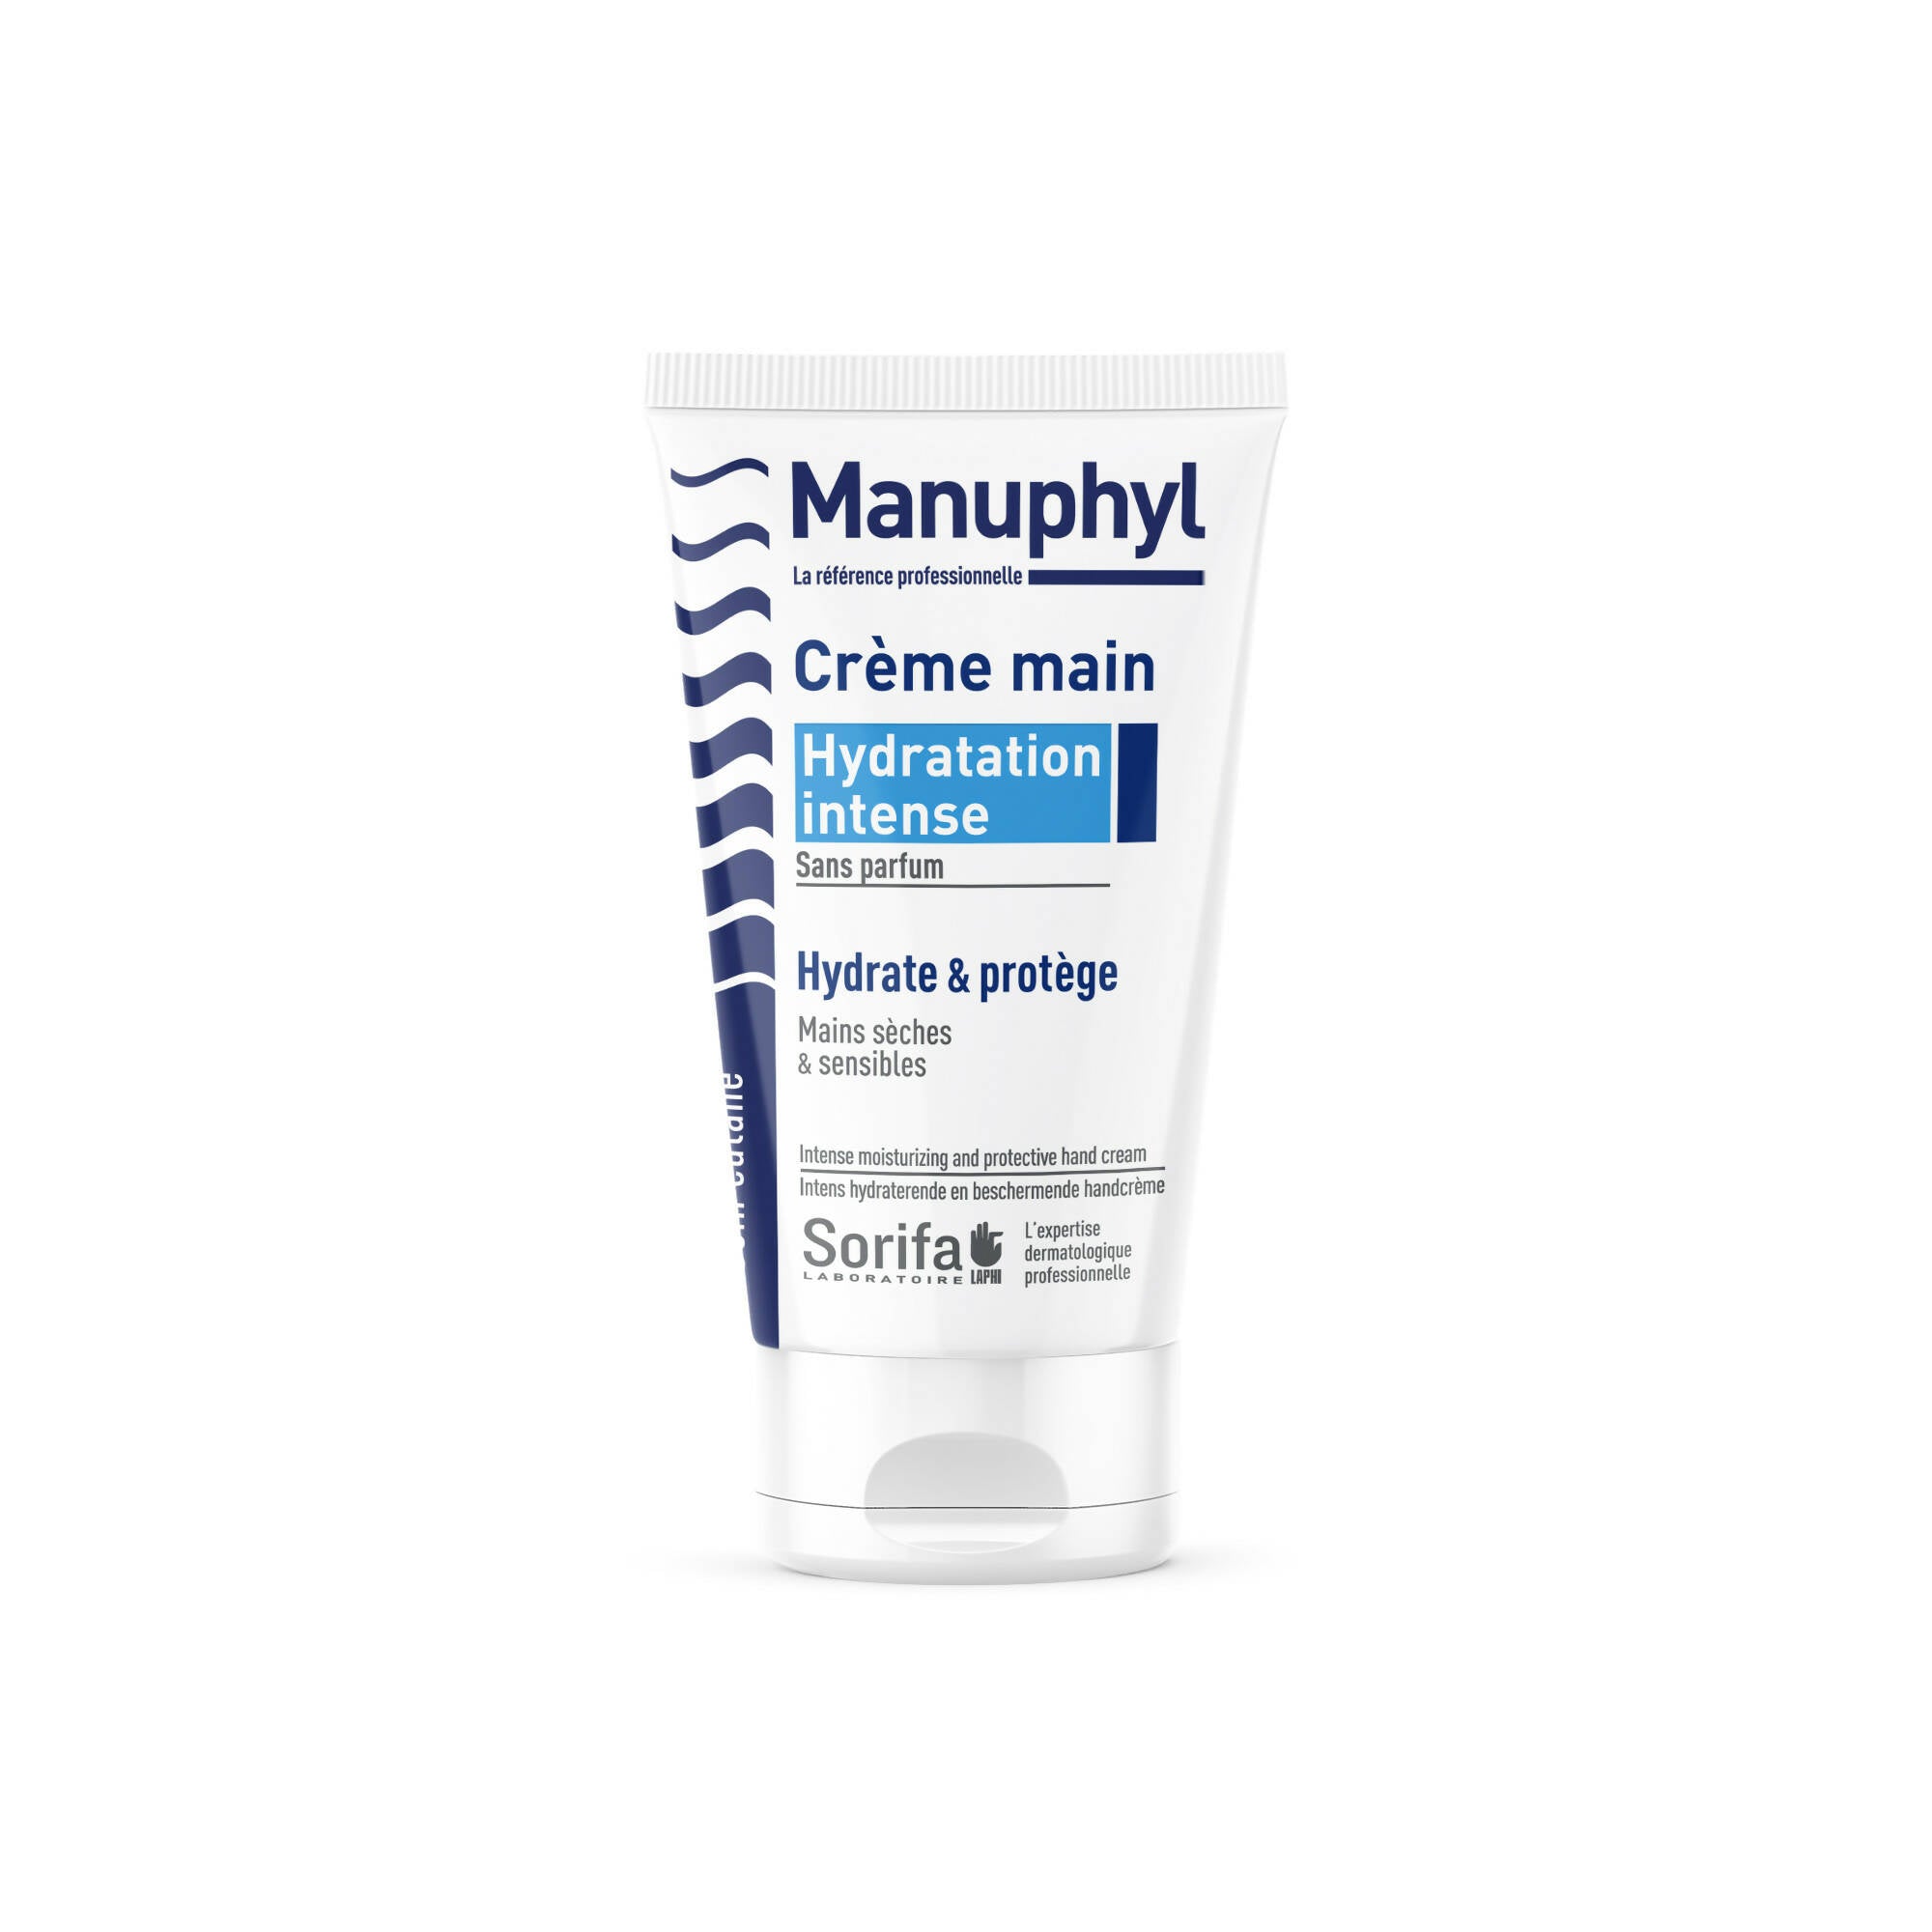 SORIFA - Set of 3 - Manuphyl Intense Hydration Hand Cream - Moisturizing and Protective - Dry and Sensitive Hands - Non-greasy, Fragrance-Free, Enriched with Allantoin and Wheat Proteins - 50 ml Tube - 0